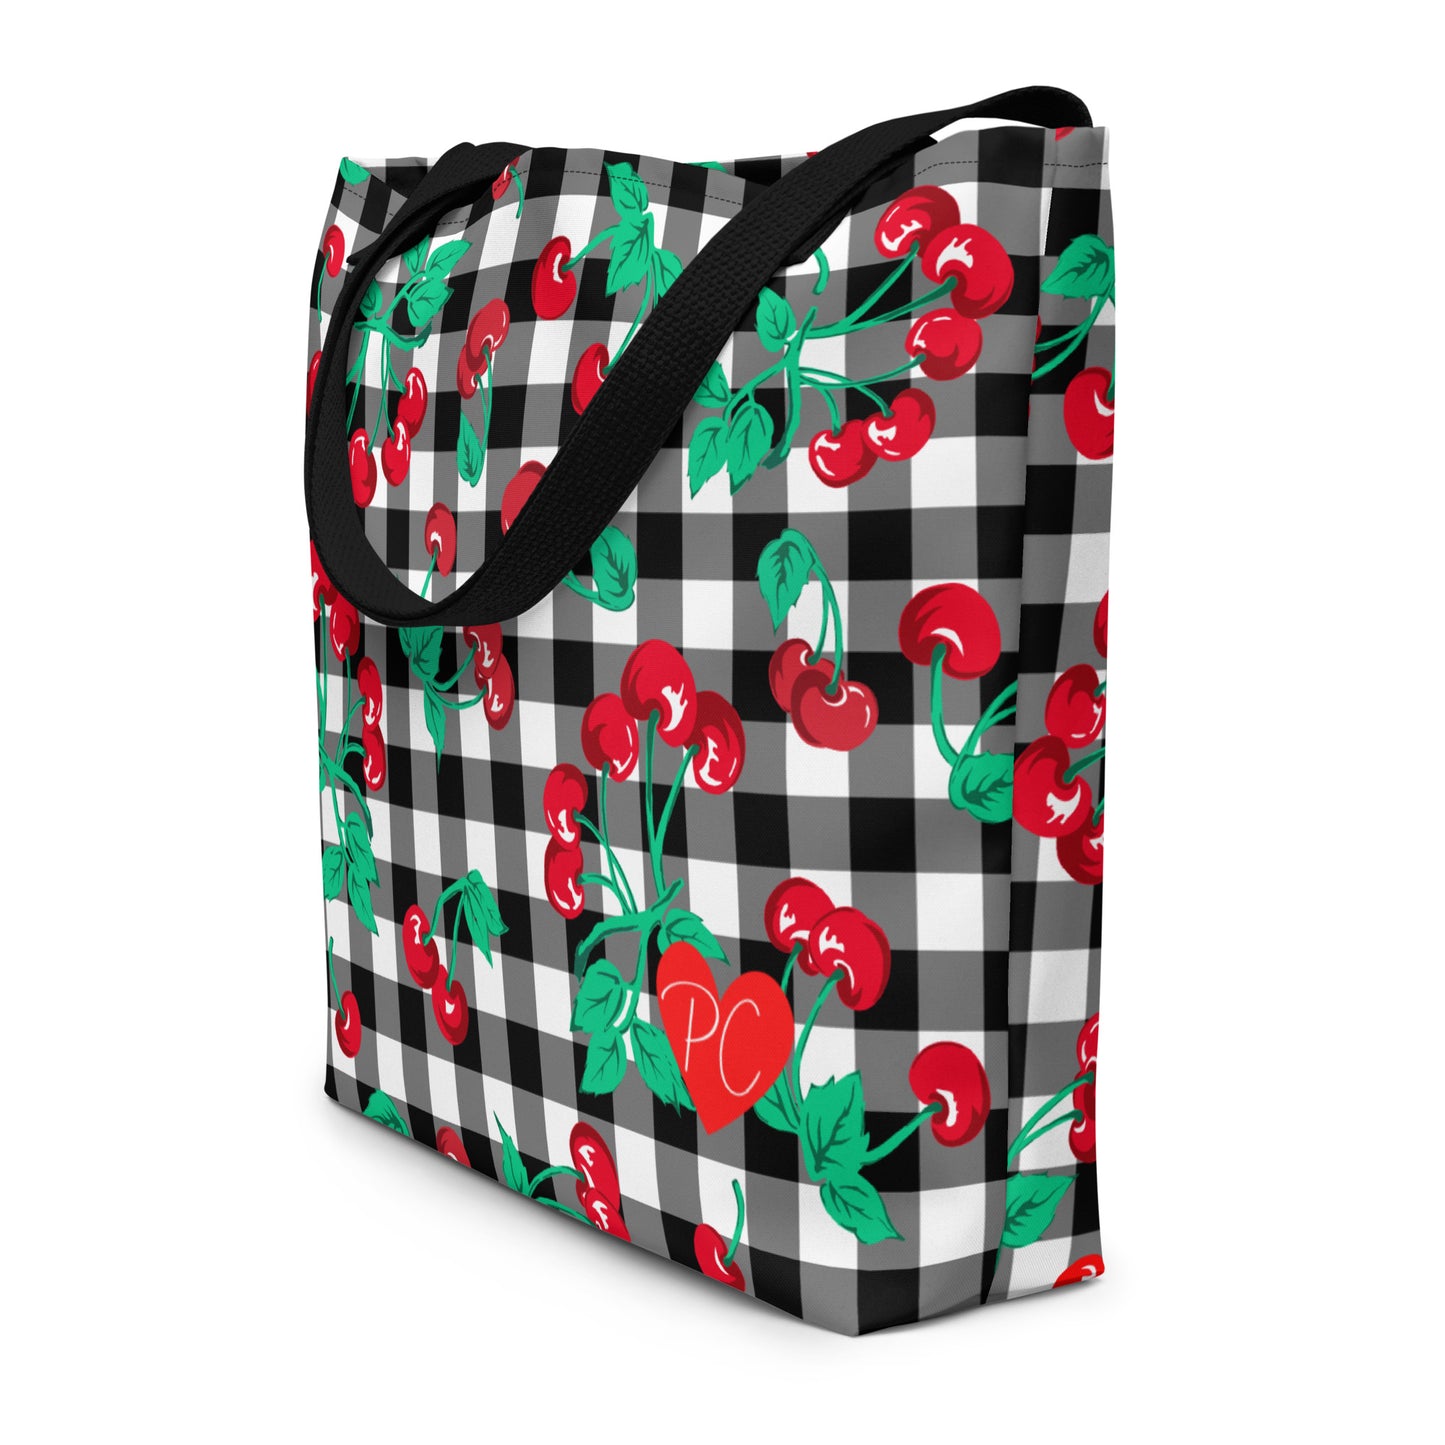 Bethany Cherry Girl Black Gingham Print Oversized Tote Bag | Pinup Couture Relaxed